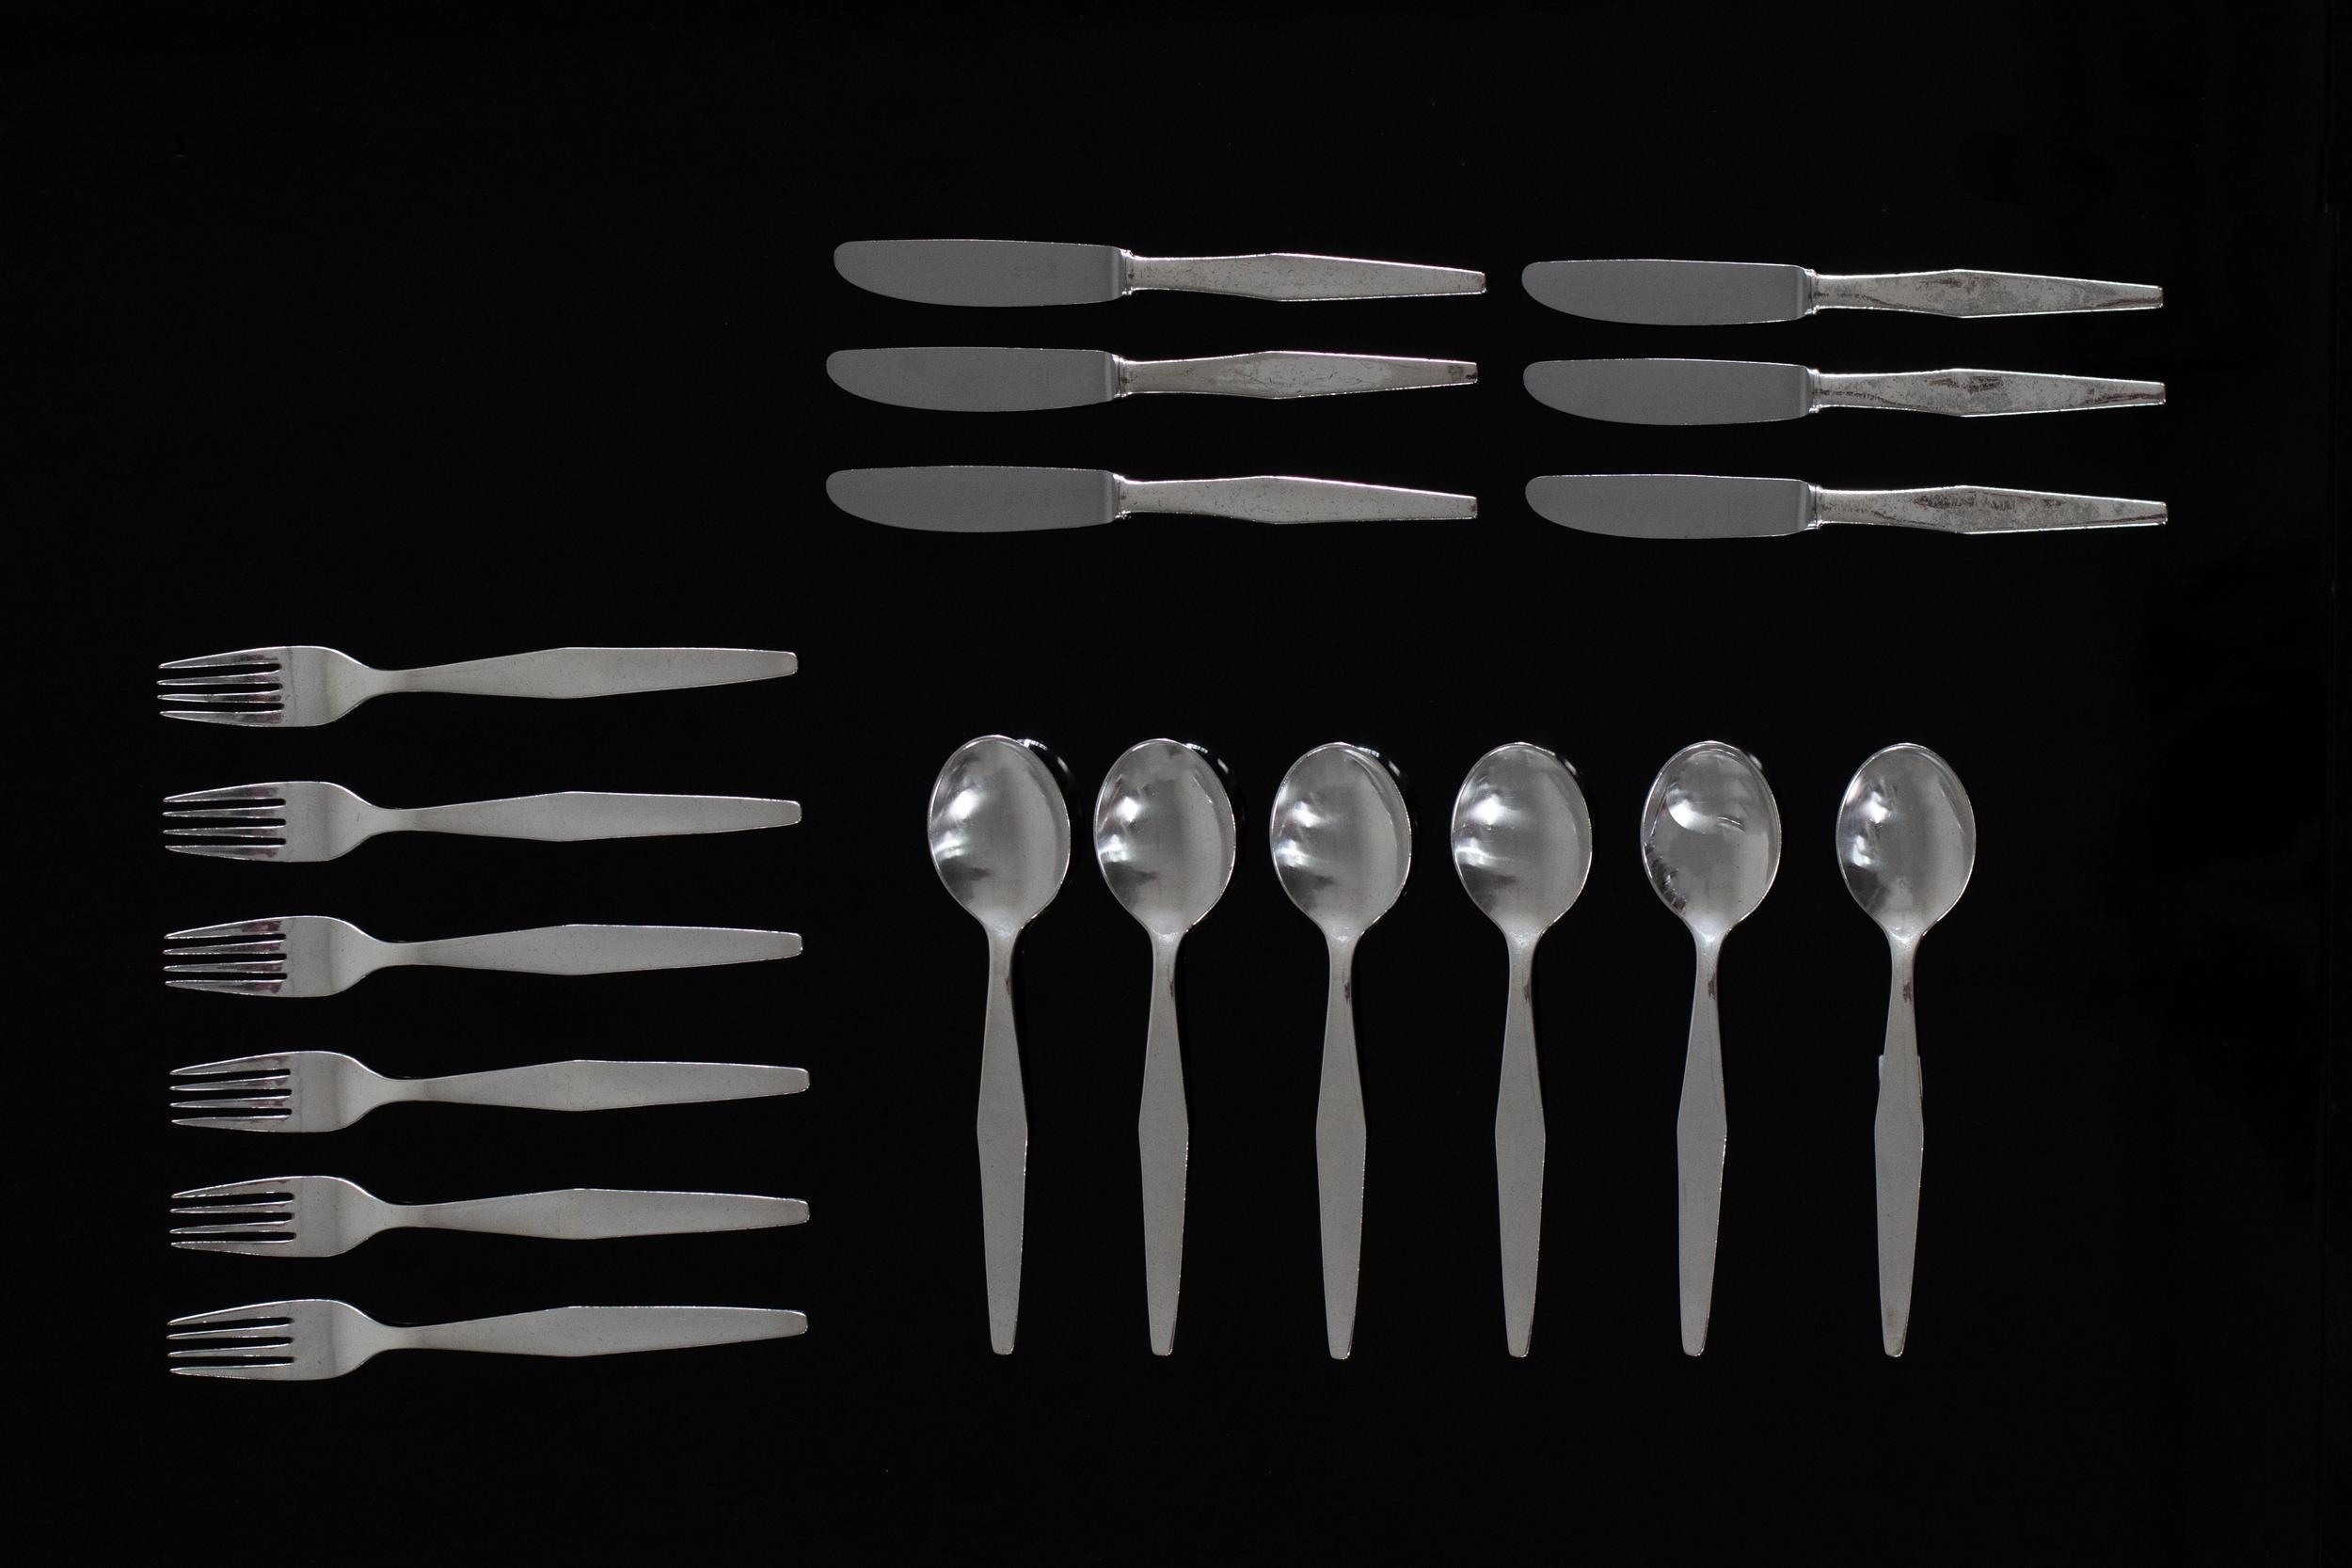 Tan France Pick

Cutlery silver service for six in nickel silver or German silver, this set includes a total of 18 pieces; 6 spoons, 6 forks, and 6 knives with a steel blade. 

Set designed by Gio Ponti for several hotels like the Granada, Solemare,